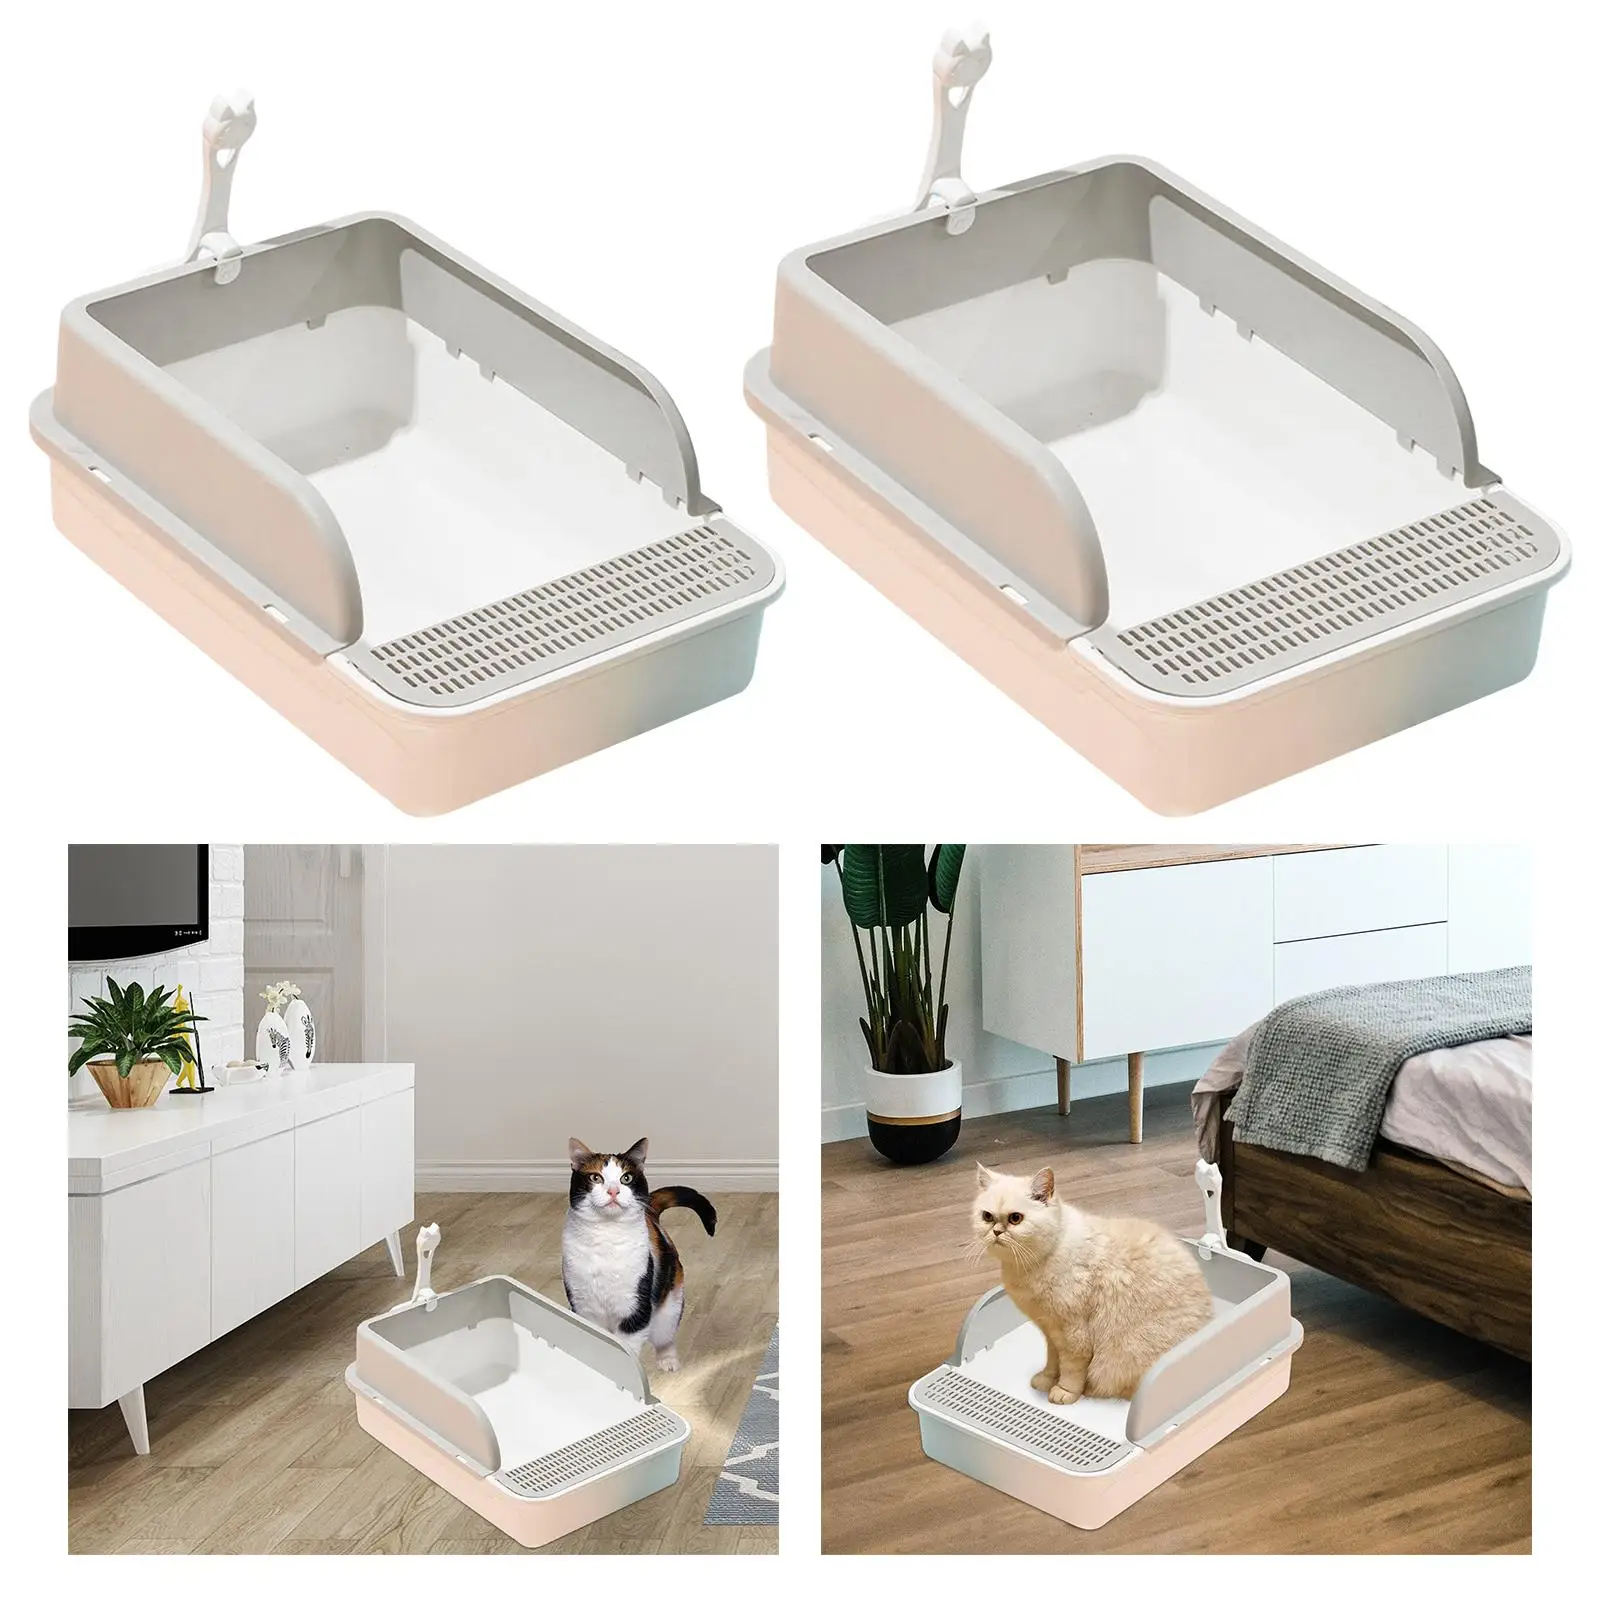 Open Air Litter Box Deep Loo Easy to Clean Bedpan Kitten Litter Tray Sturdy with High Side Pet Litter Tray for Bunny Kitten